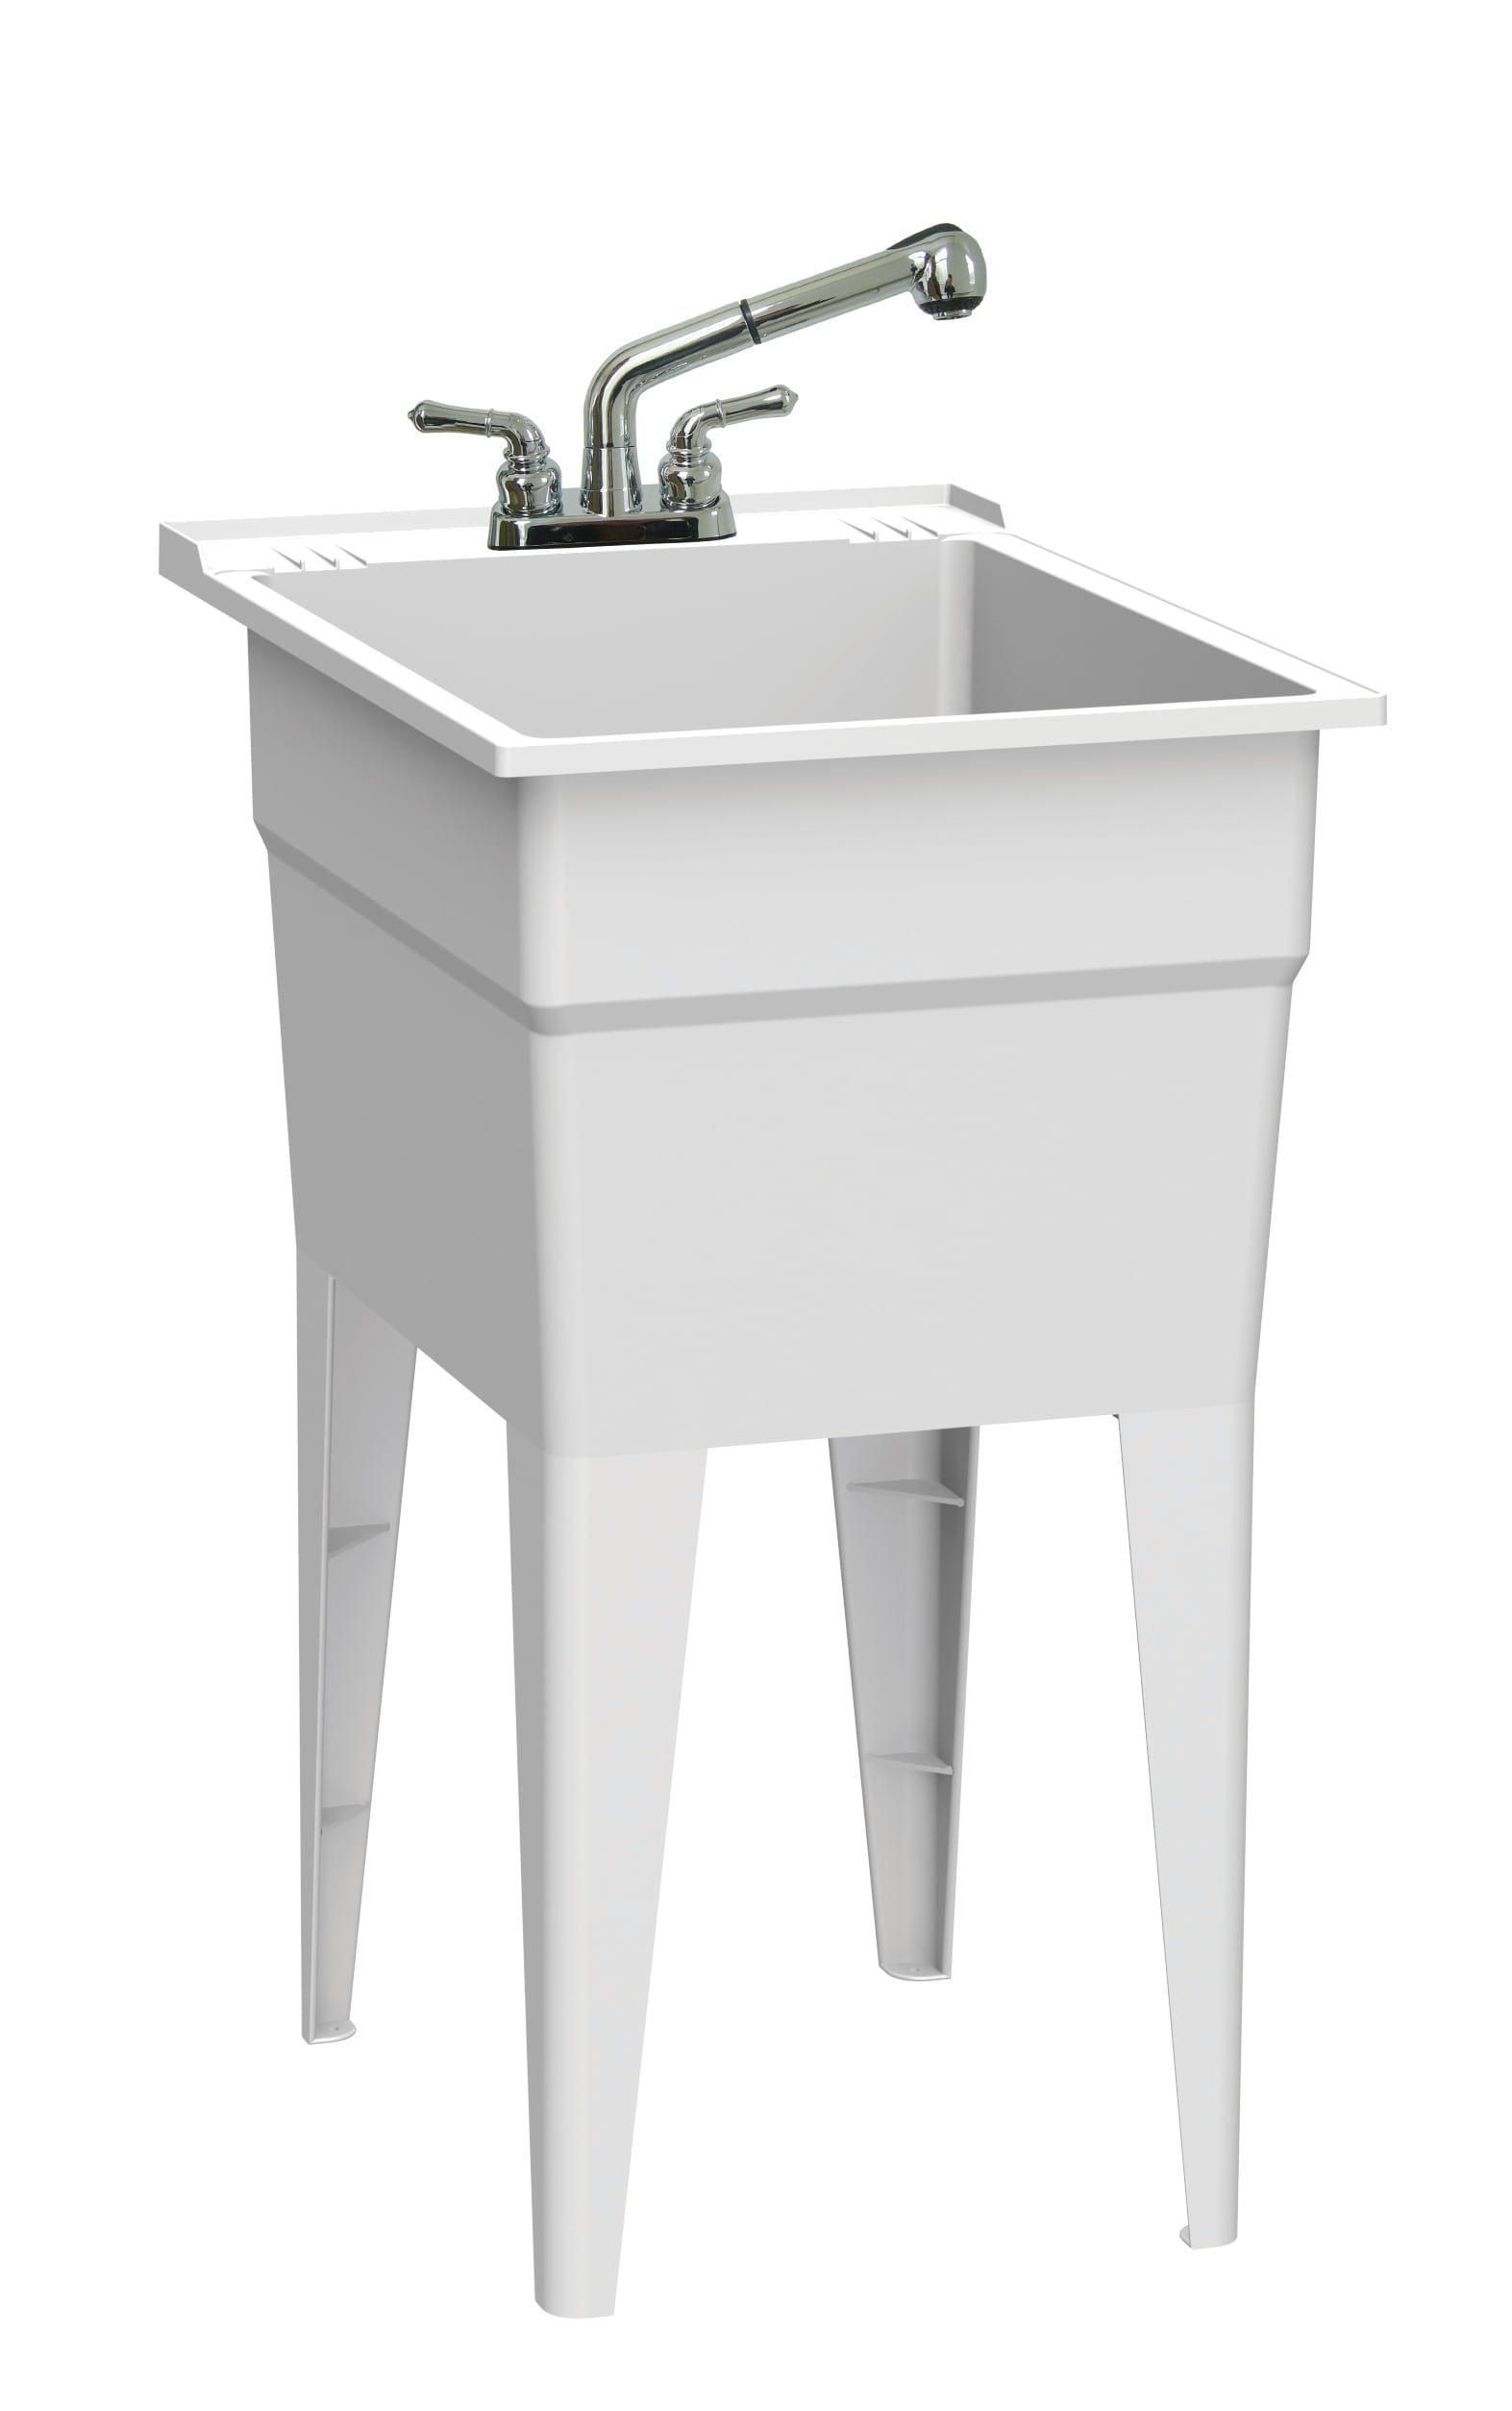 UTILITYSINKS Plastic 18 Inch Freestanding Utility Tub Sink with Heavy Duty  Stainless Steel Swing Faucet for Garage, Laundry Room, and Garden, White